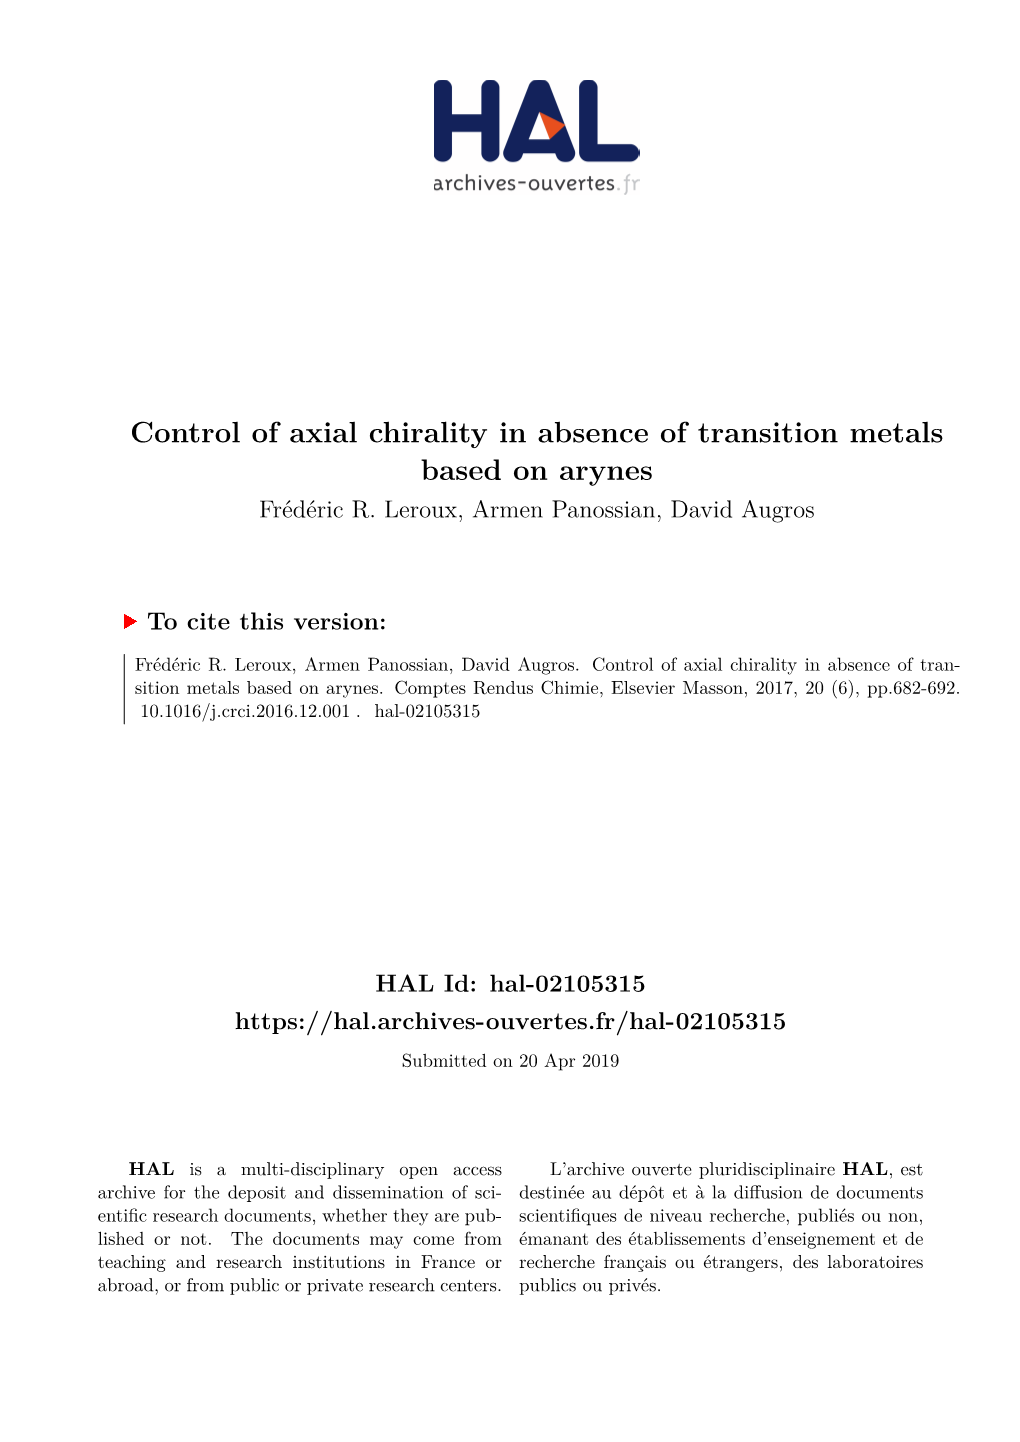 Control of Axial Chirality in Absence of Transition Metals Based on Arynes Frédéric R